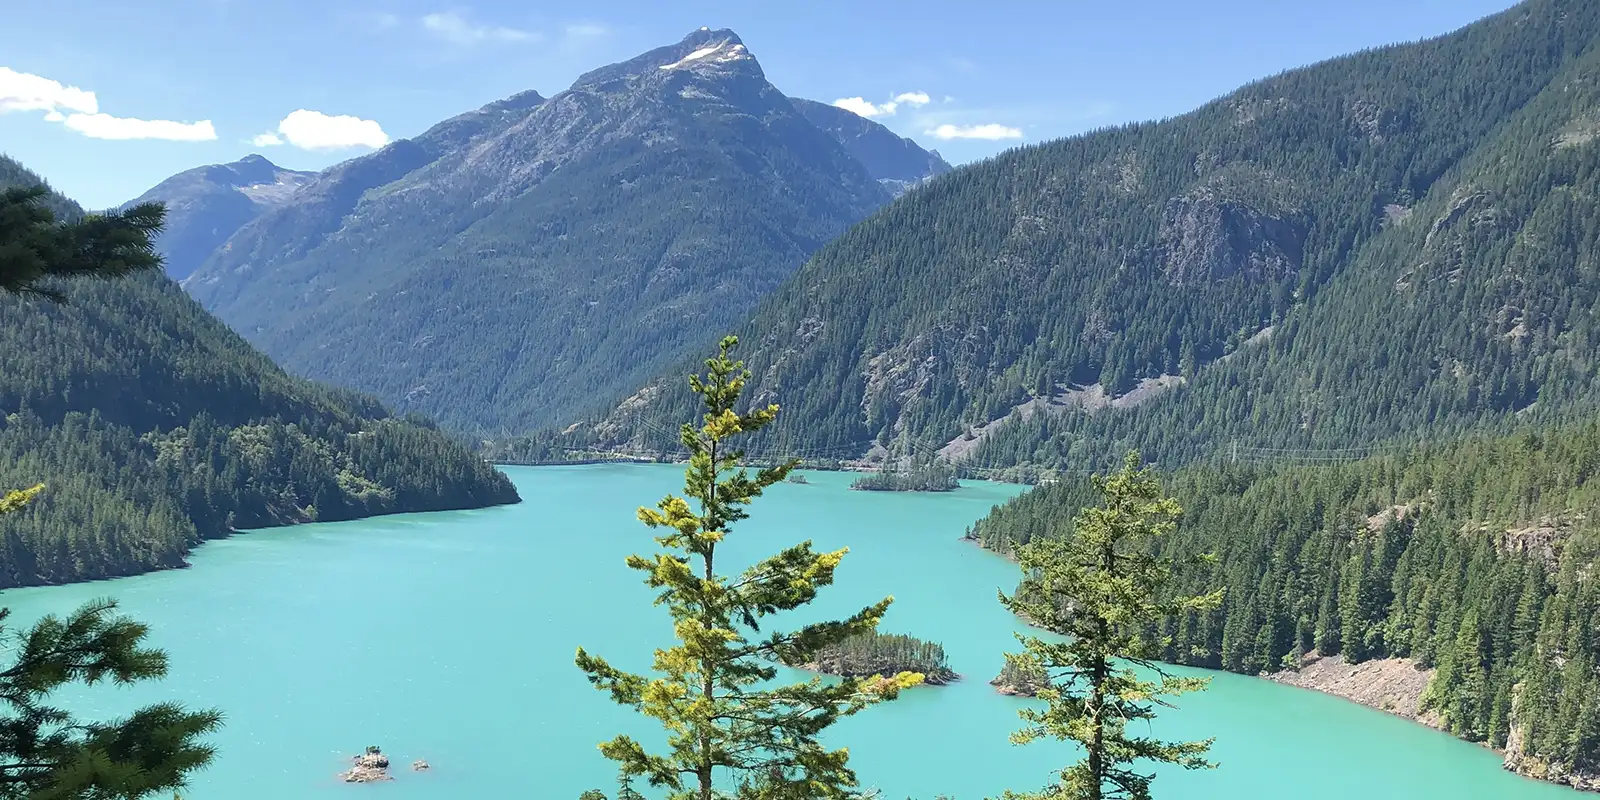 Looking down on Diablo Lake on a sunny day